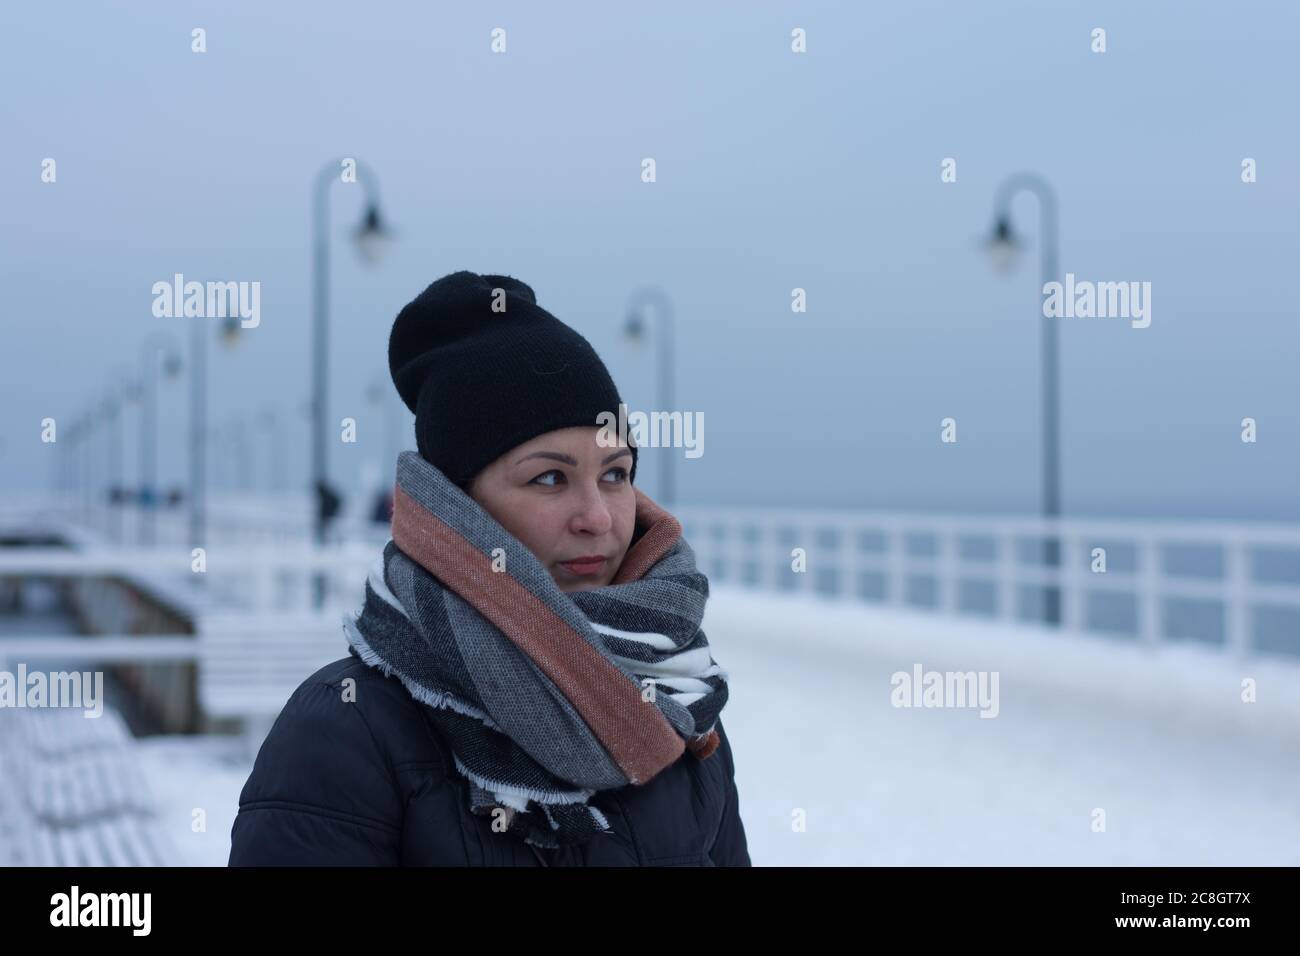 Winter portrait of young woman dressed warm for freezing winter conditions by Baltic Sea in Northern Europe Stock Photo